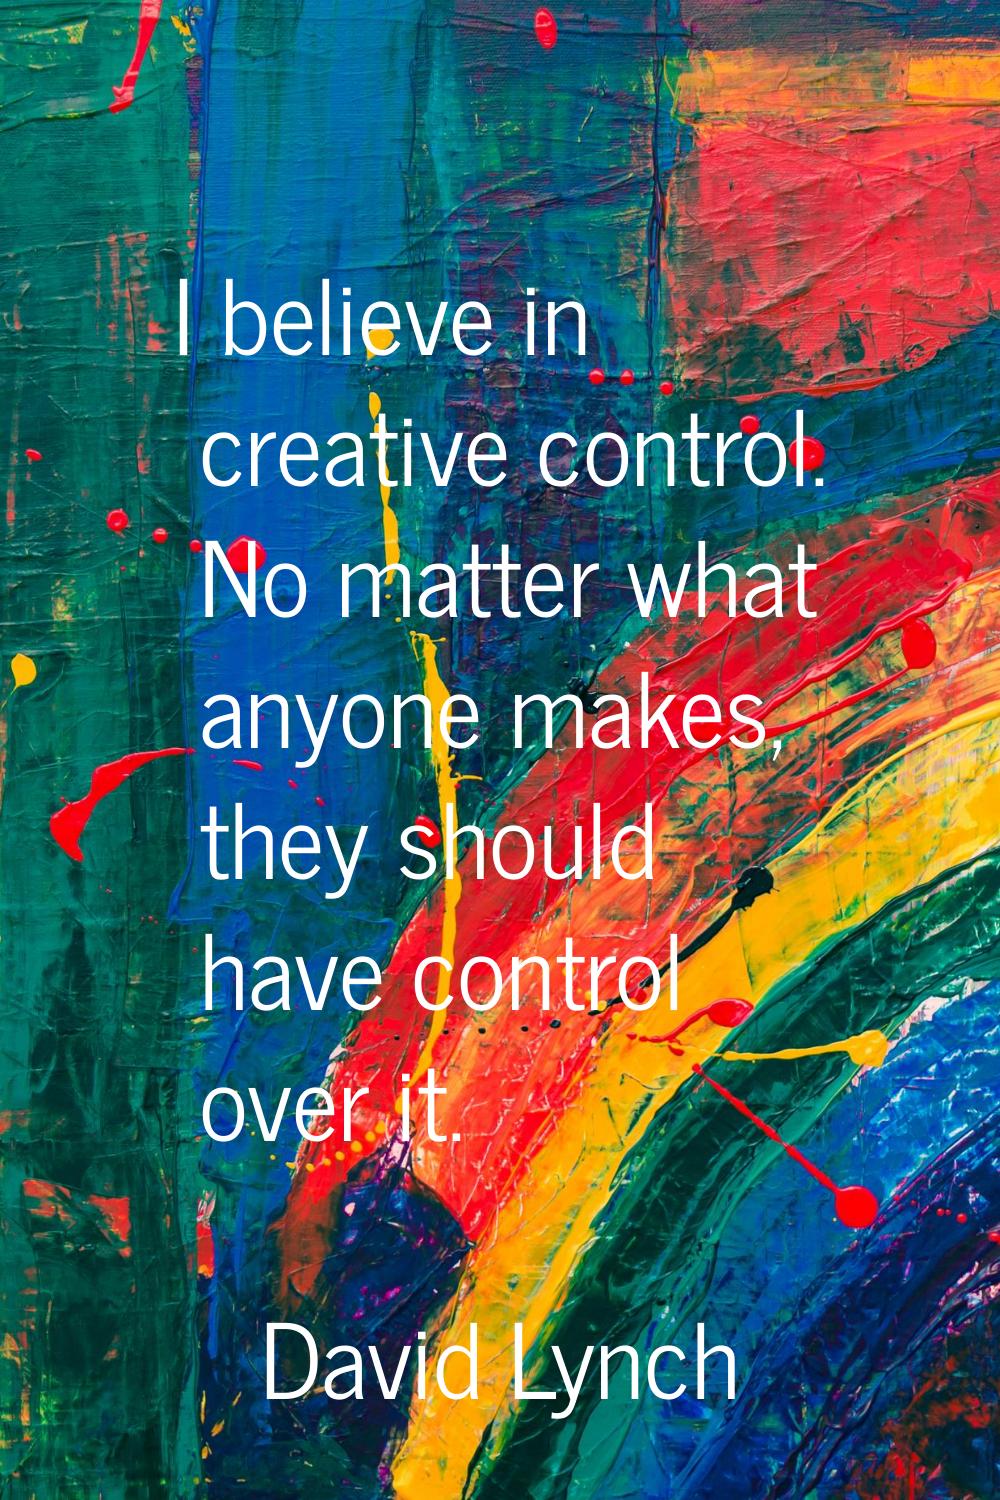 I believe in creative control. No matter what anyone makes, they should have control over it.